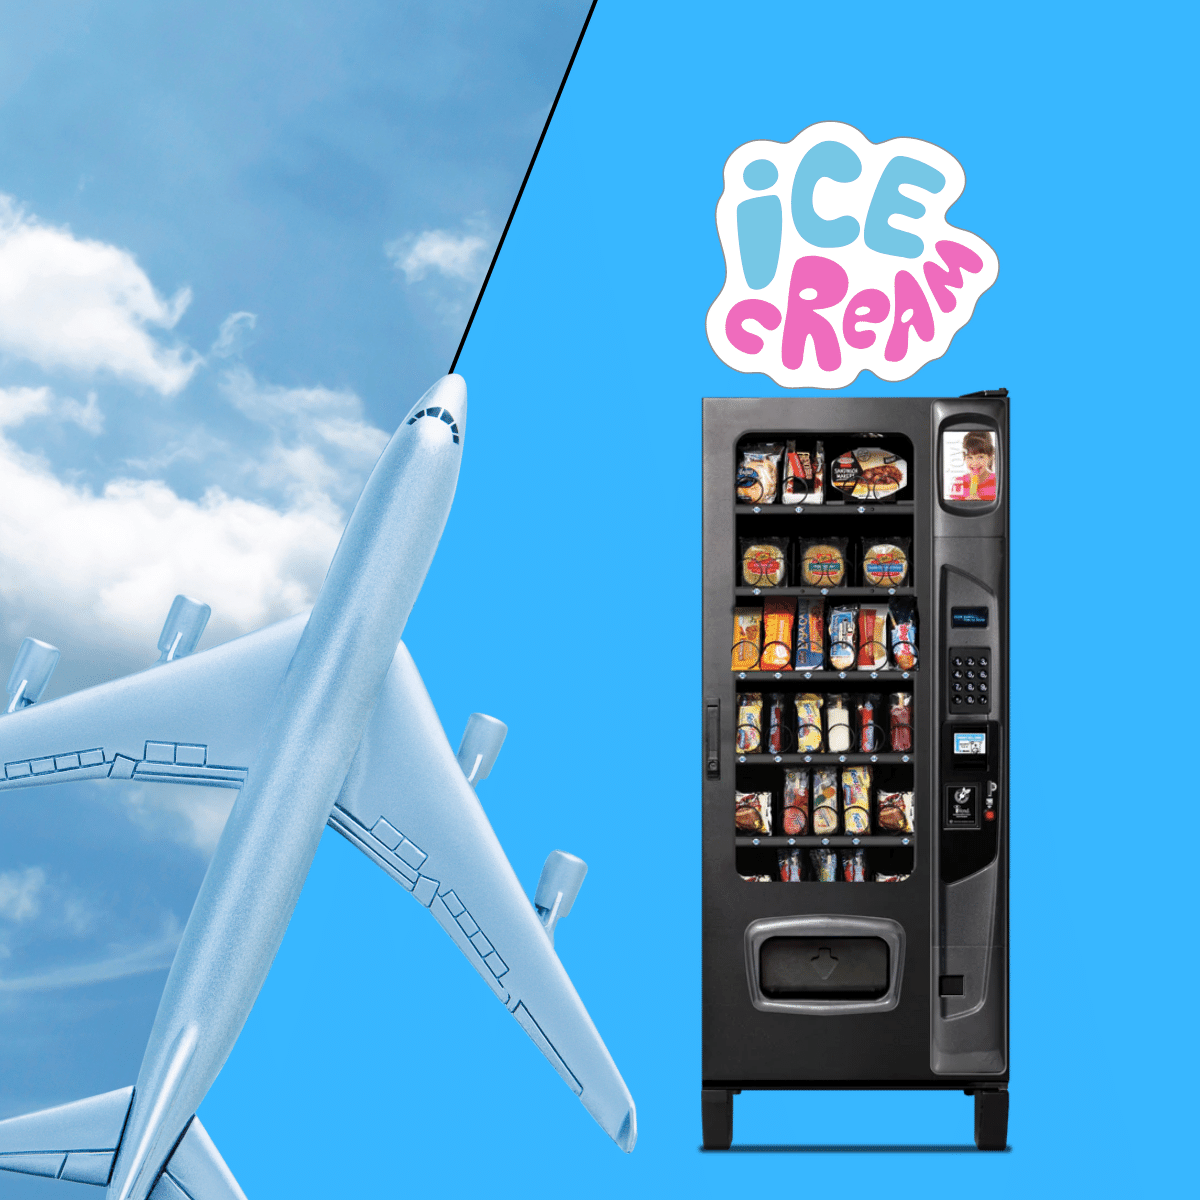 ICE CREAM VENDING AT THE AIRPORT